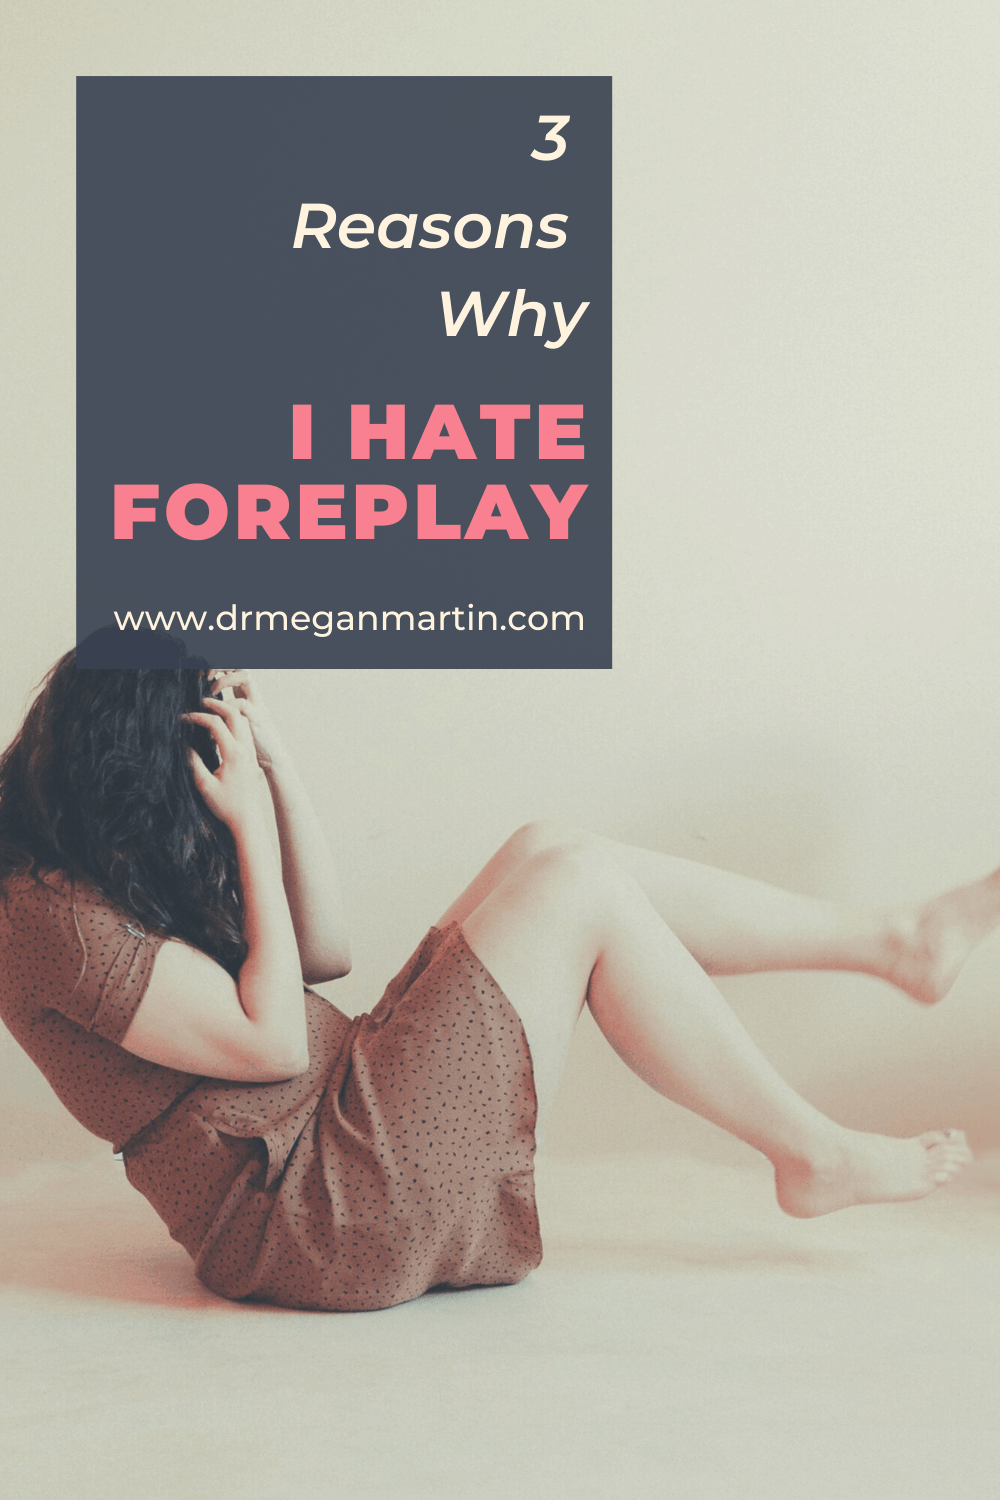 Here's 3 reasons why I hare foreplay